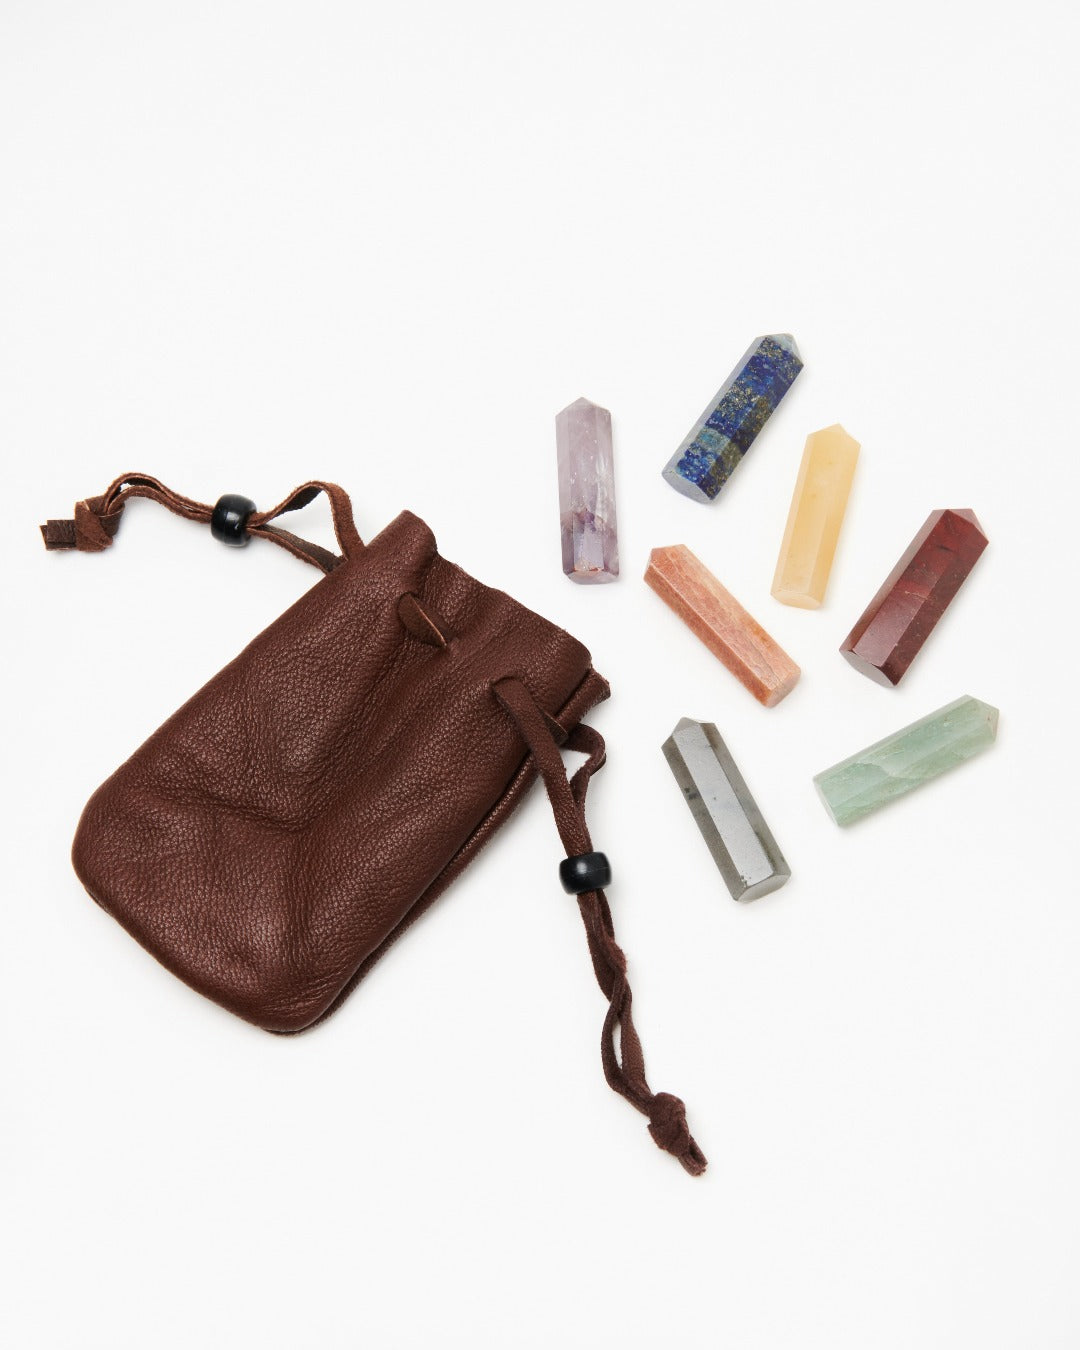 Chakra Crystal Towers Set + Leather Pouch - Crystals Shop, Gems + Wholesale Sage by Liv Rocks